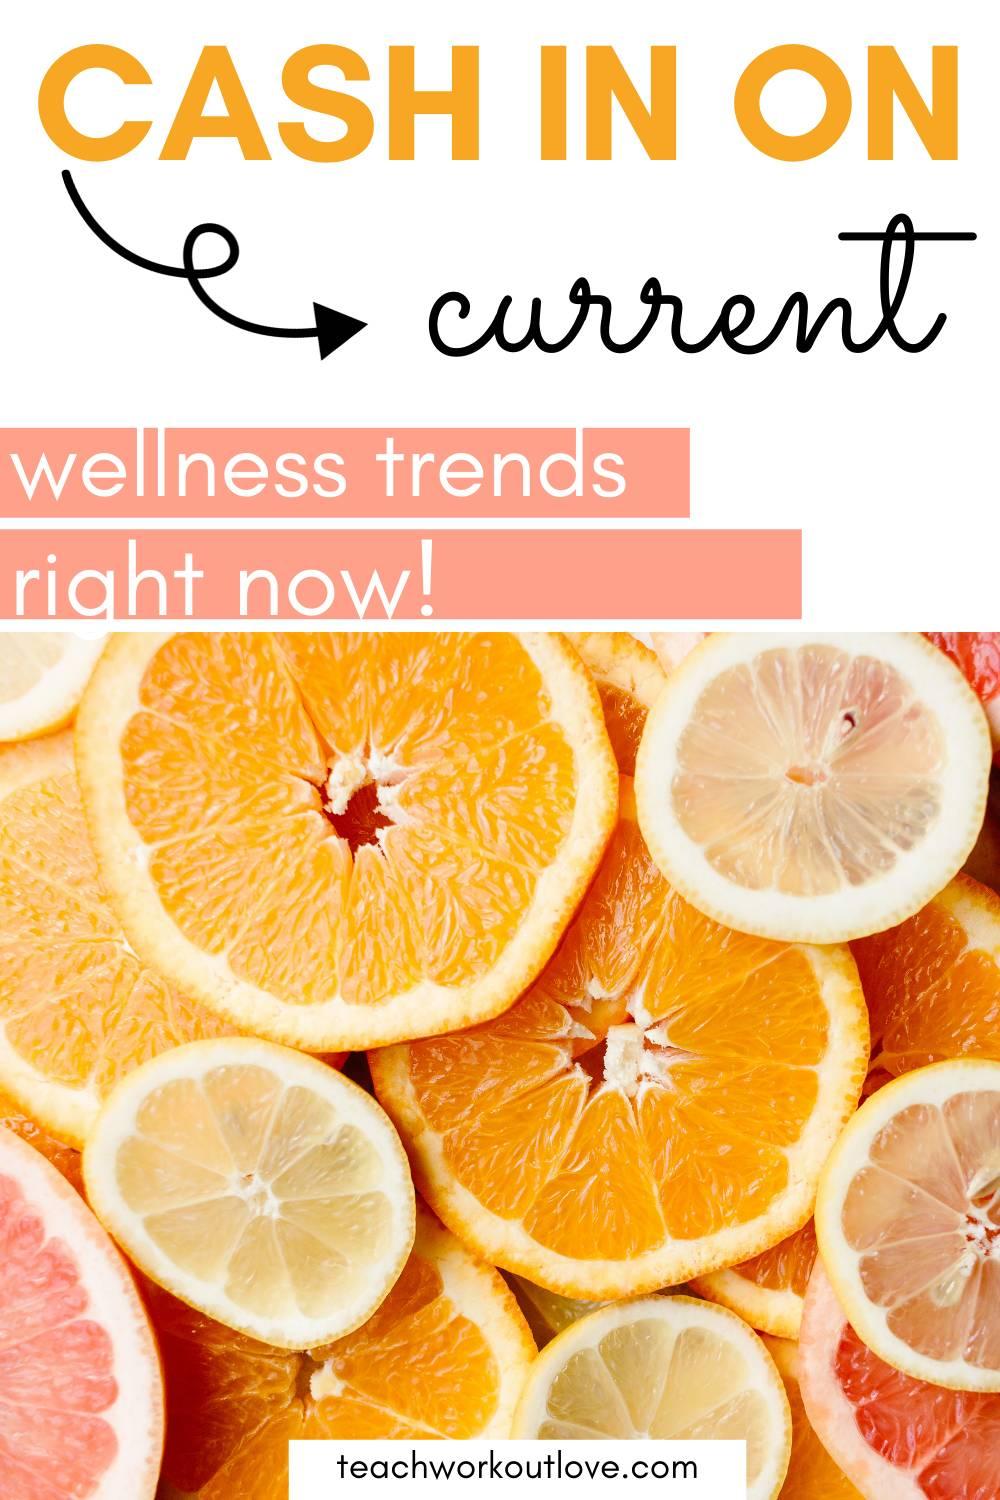 The wellness trends in 2021 are still growing, check out here more about how to cash in on the current wellness trend.